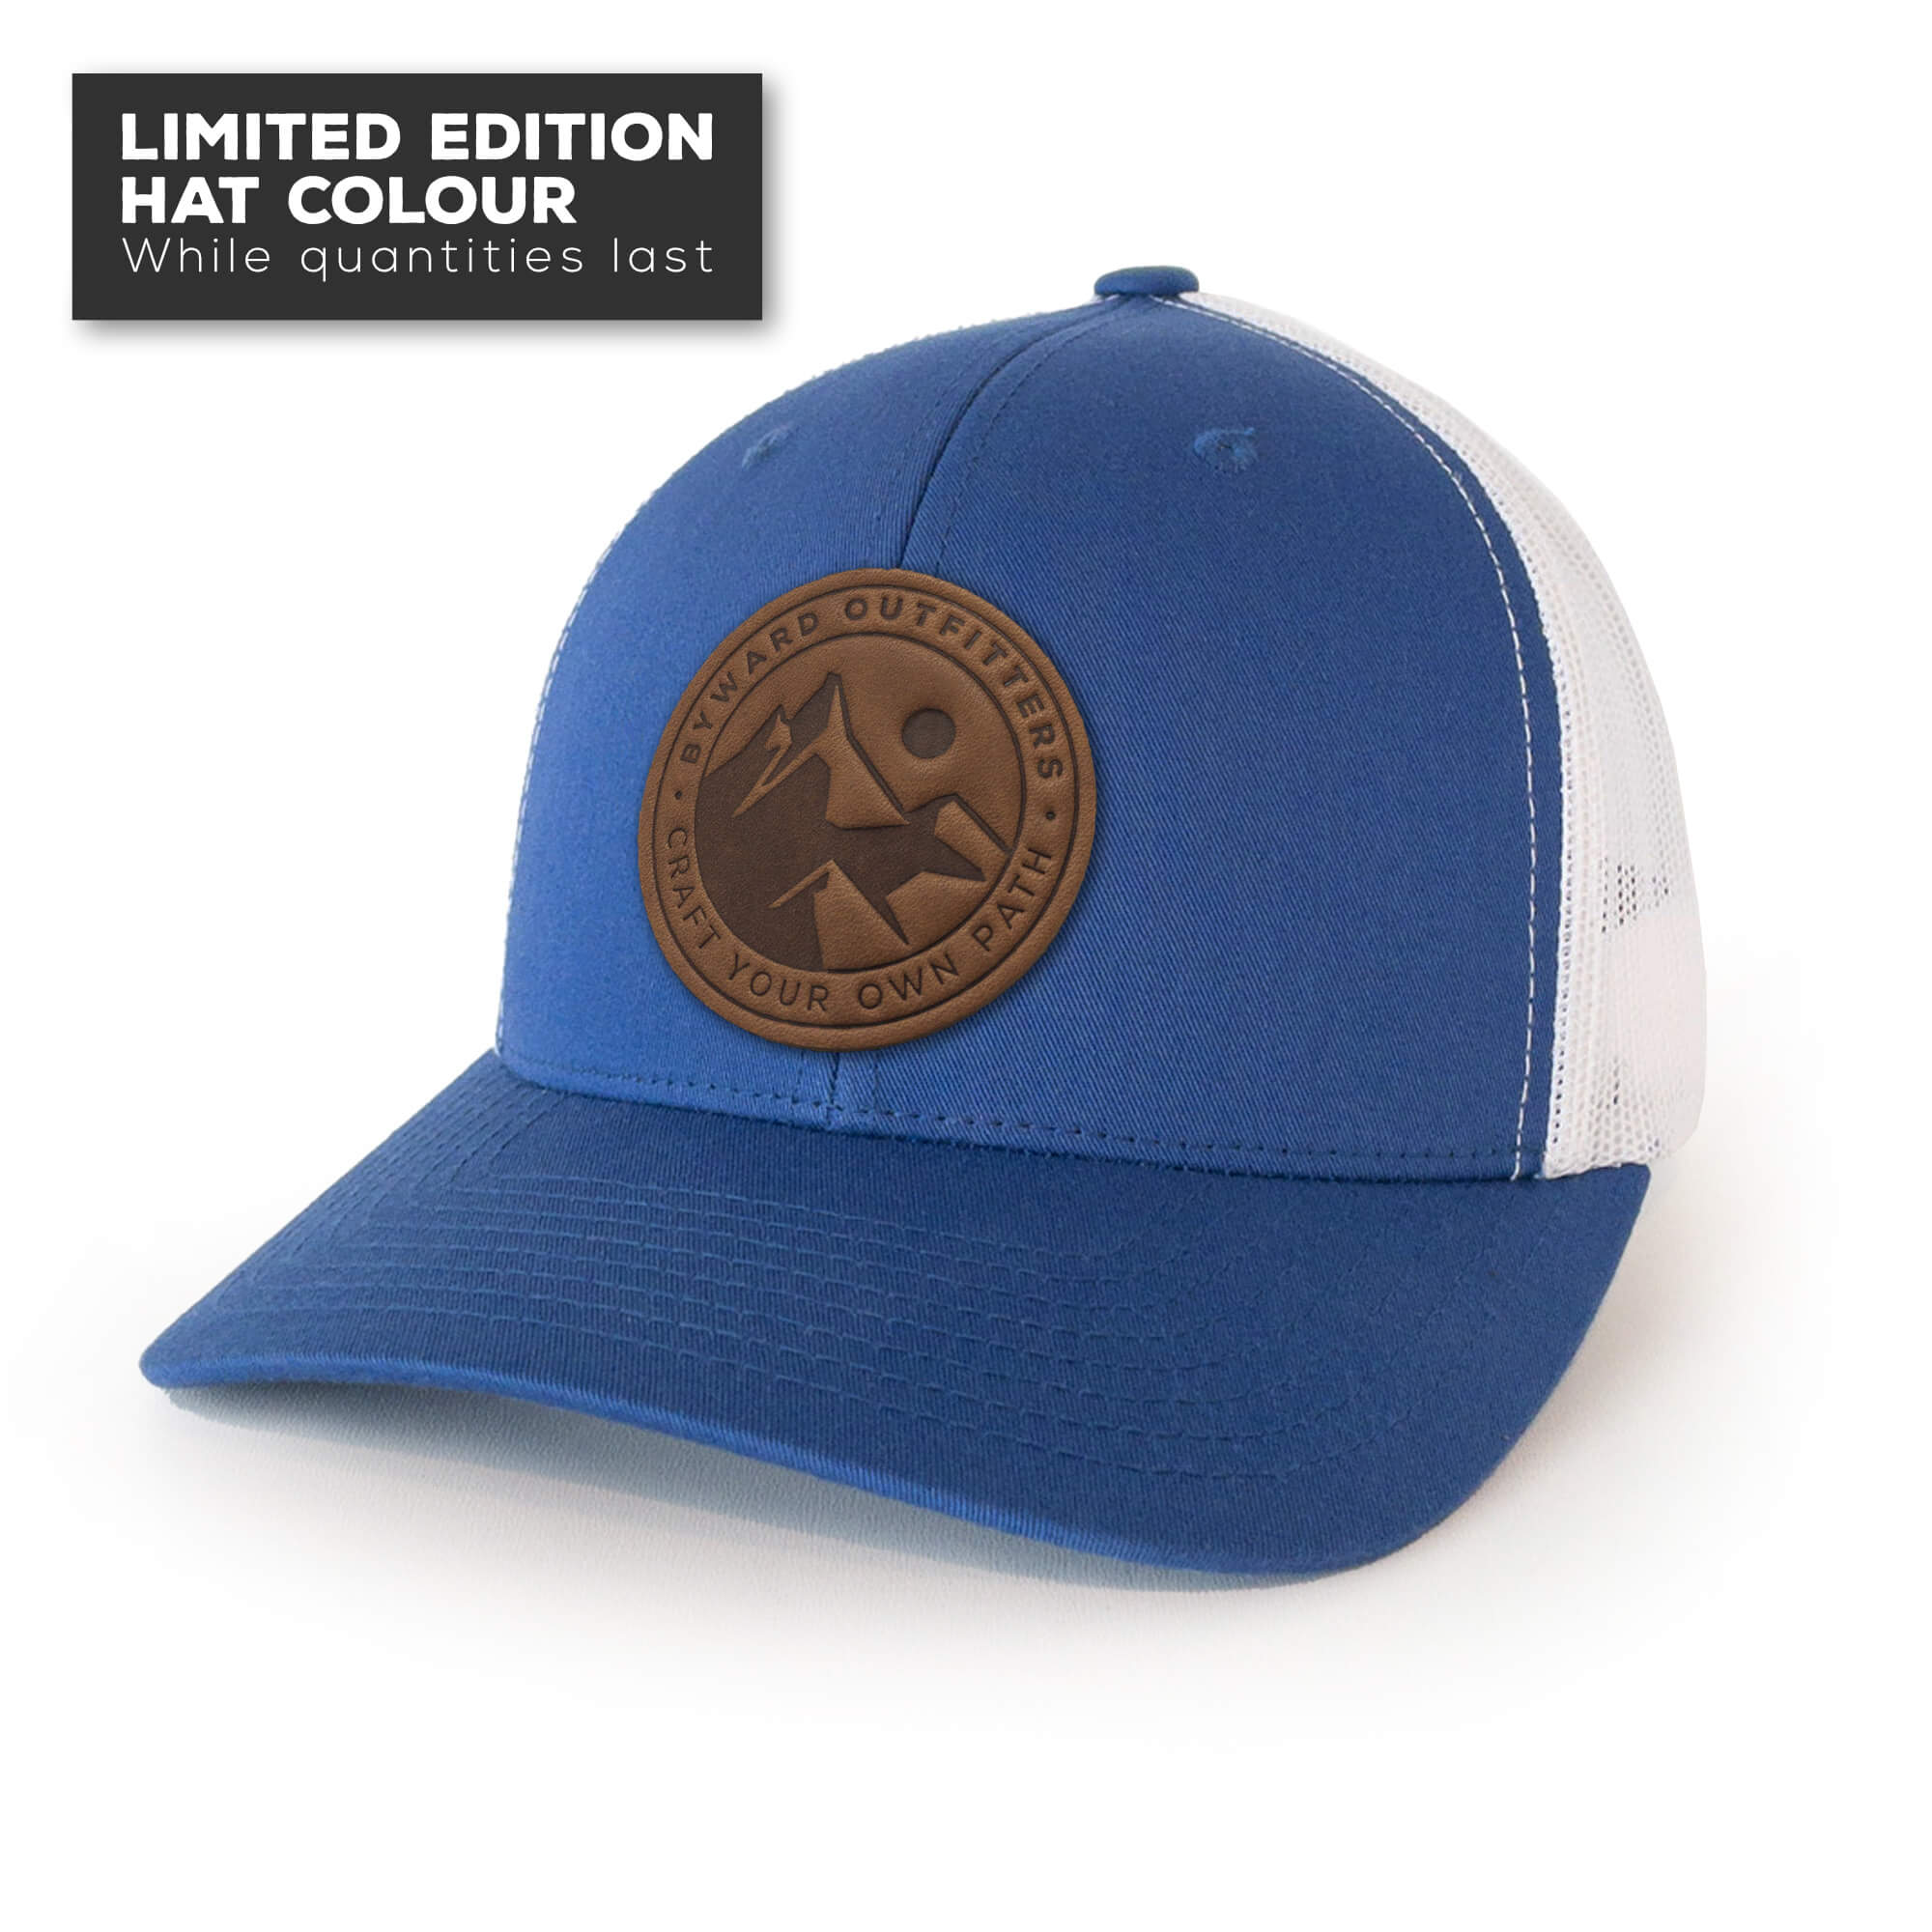 Royal Blue trucker hat with full-grain leather patch of Mountain Escape